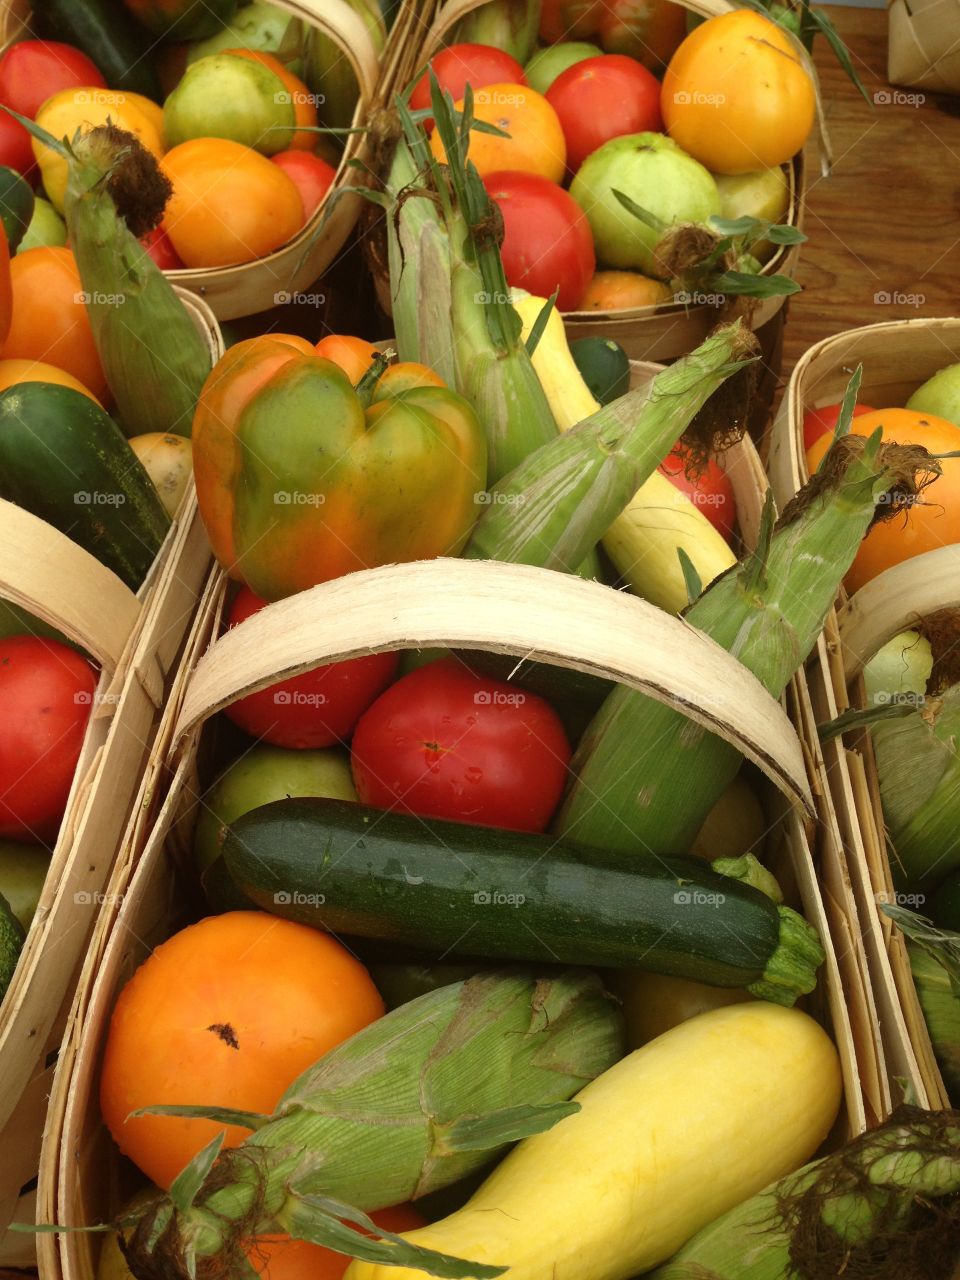 Produce baskets for sale at the Grainger County, Tennessee, tomato festival